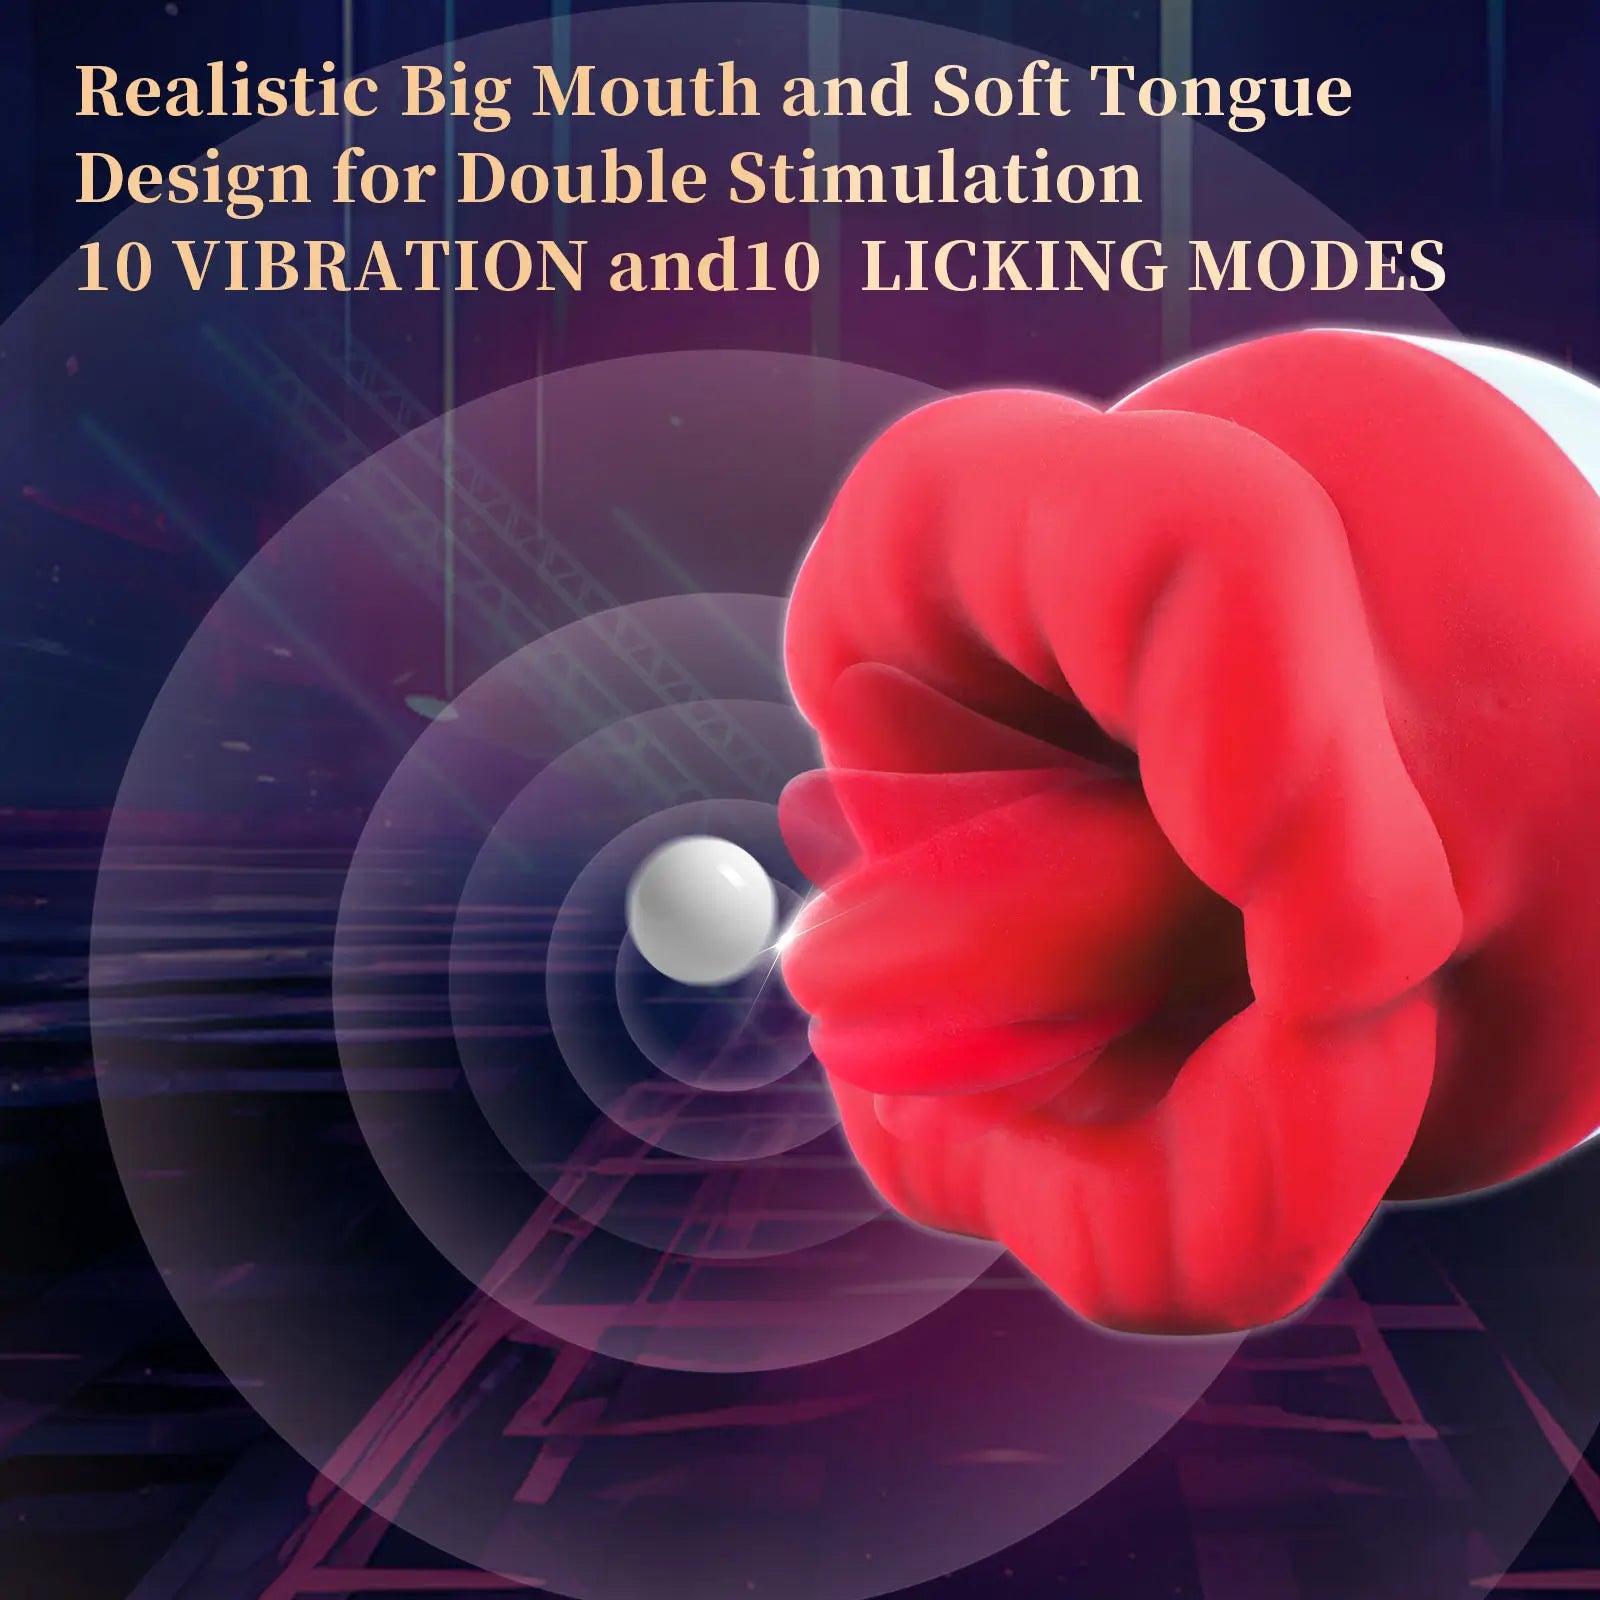 Mouth-shaped Clitoral Rose toys